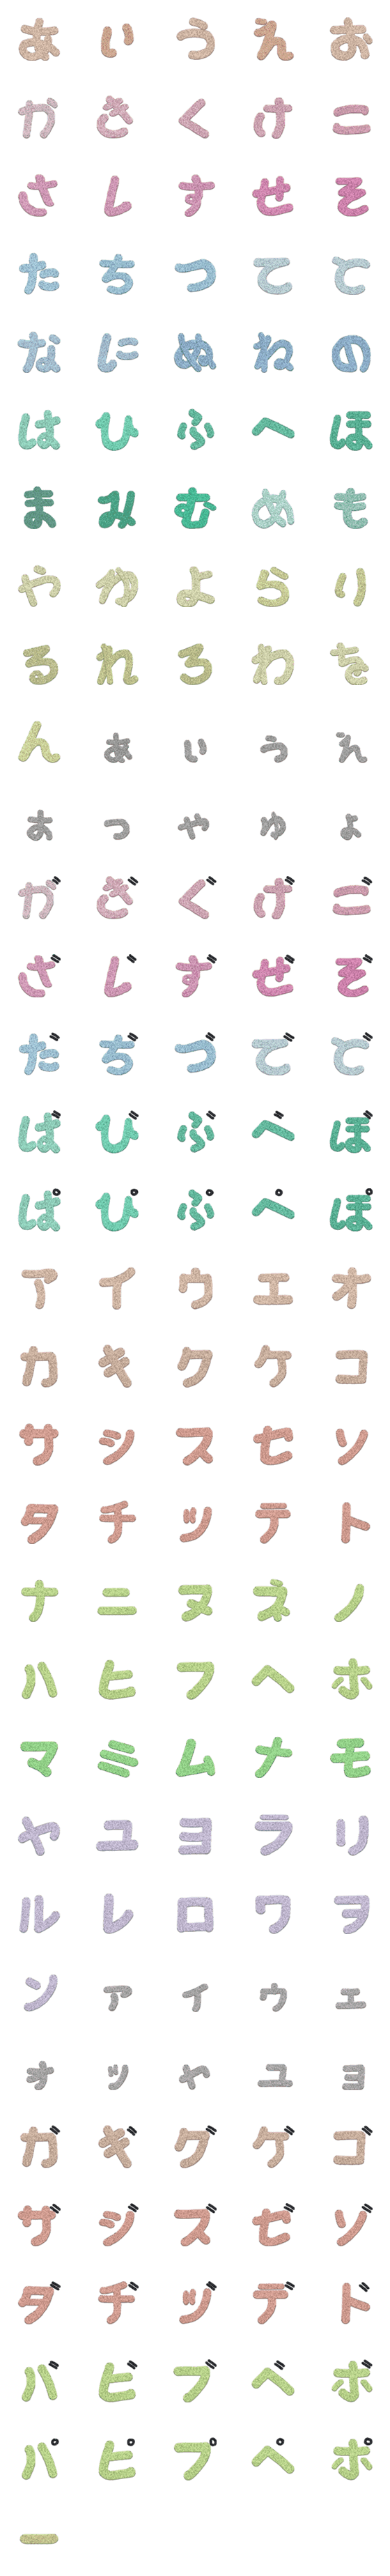 [LINE絵文字]キラキラ 文字 絵文字 （カナ）の画像一覧